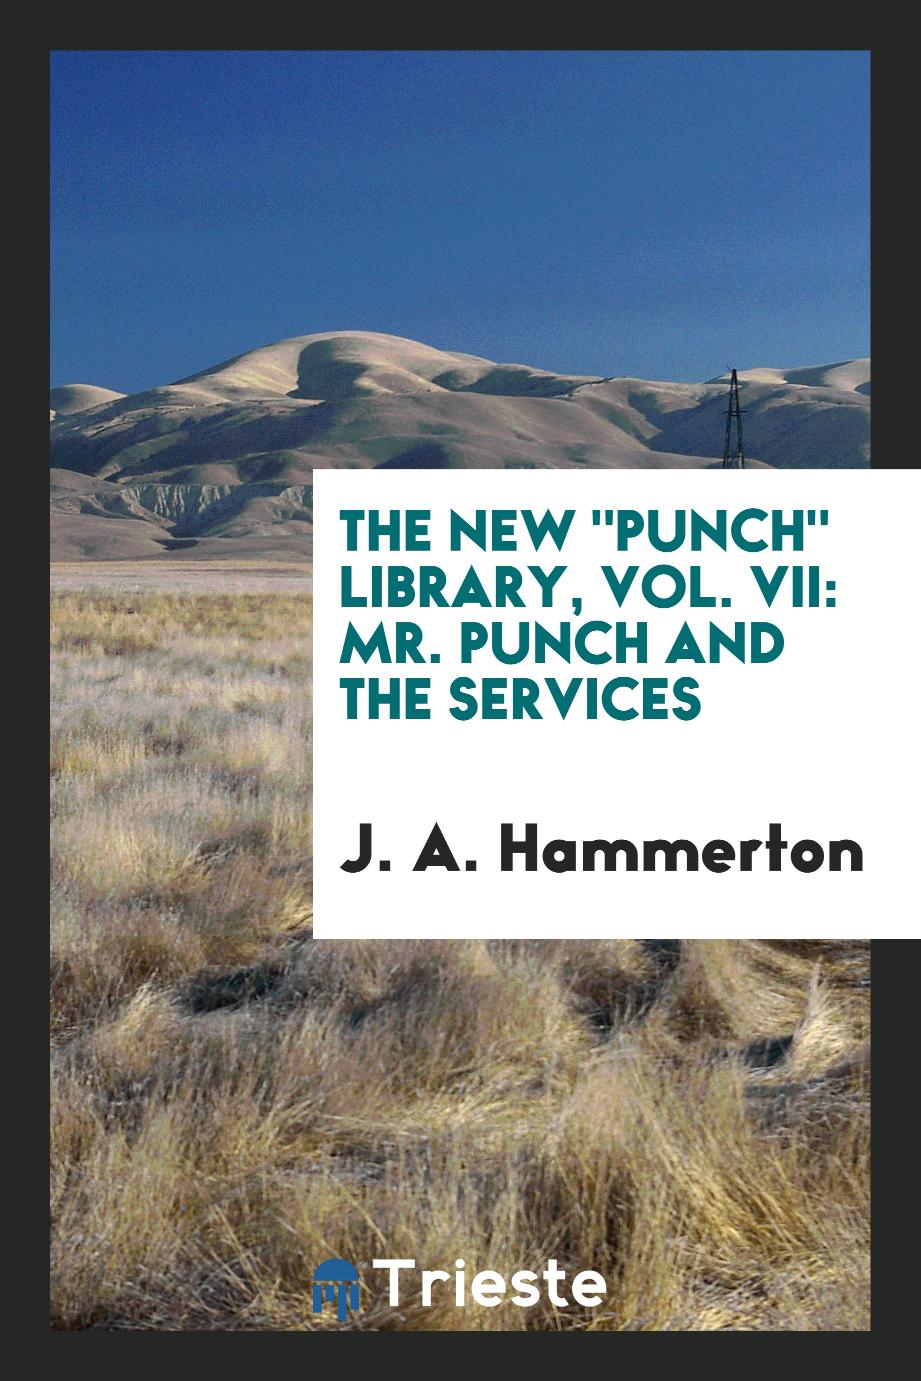 The New "Punch" Library, Vol. VII: Mr. Punch and the services